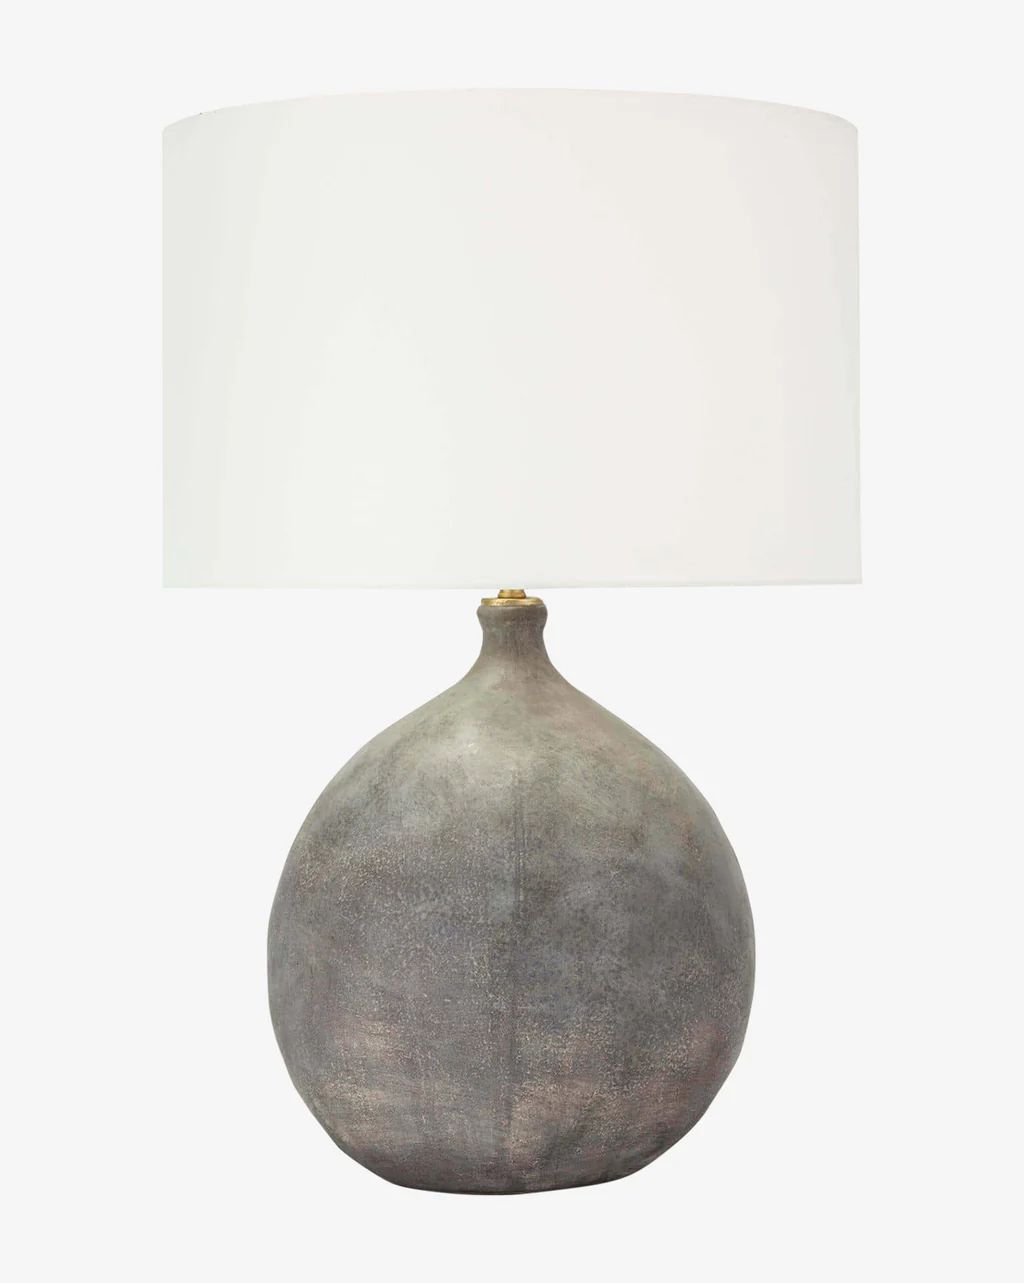 Dover Ceramic Table Lamp | McGee & Co.